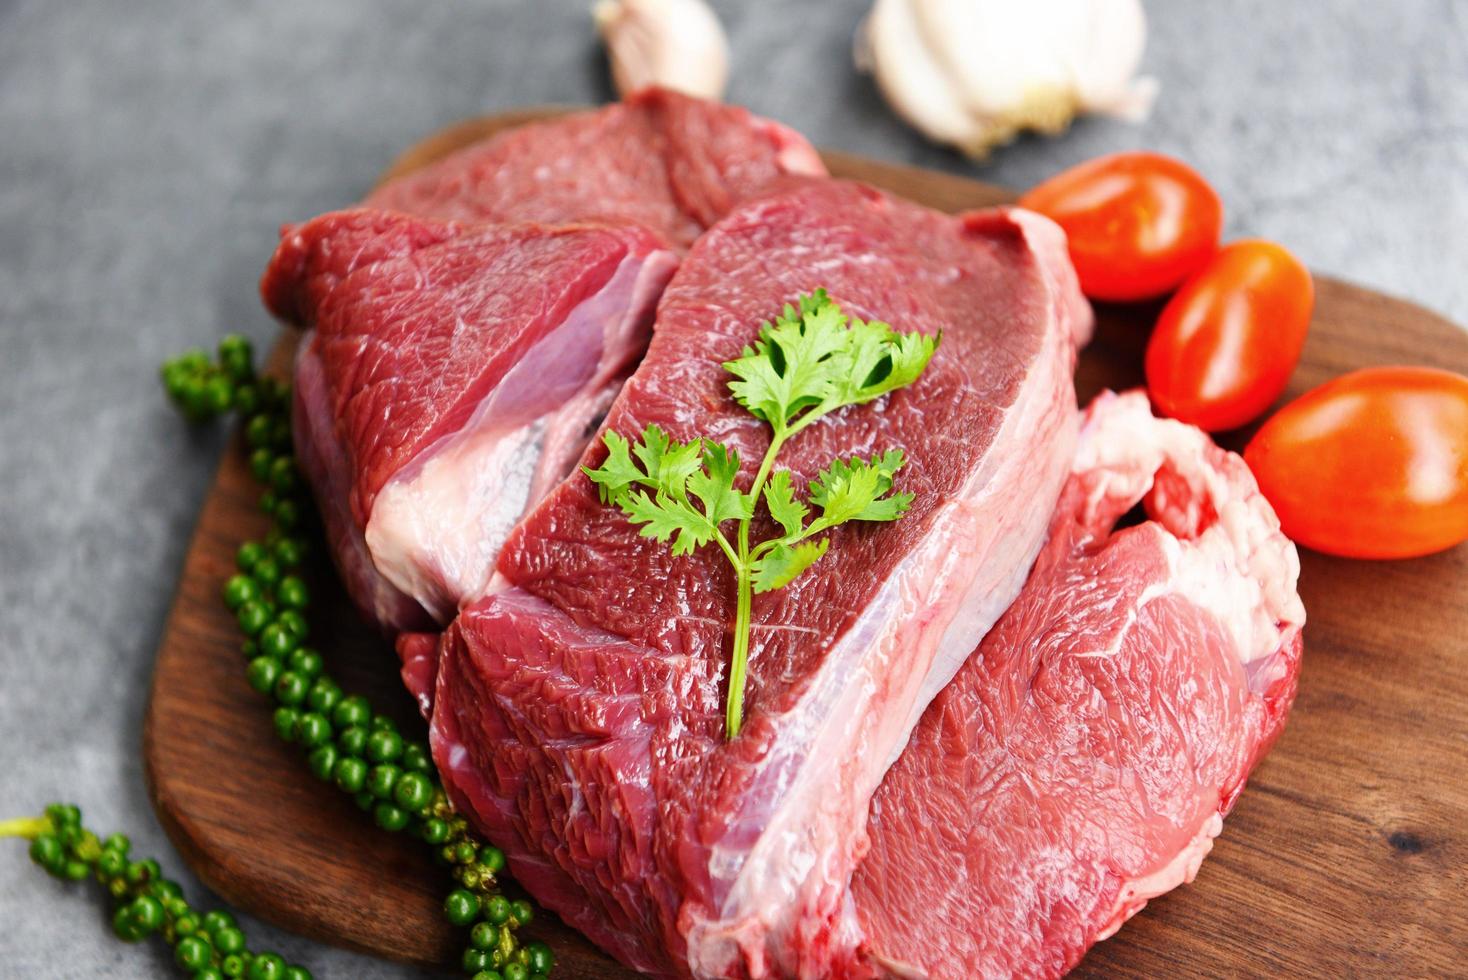 Raw beef meat on wooden cutting board on the kitchen table for cooking beef steak roasted or grilled with ingredients herb and spices Fresh beef animal protein photo